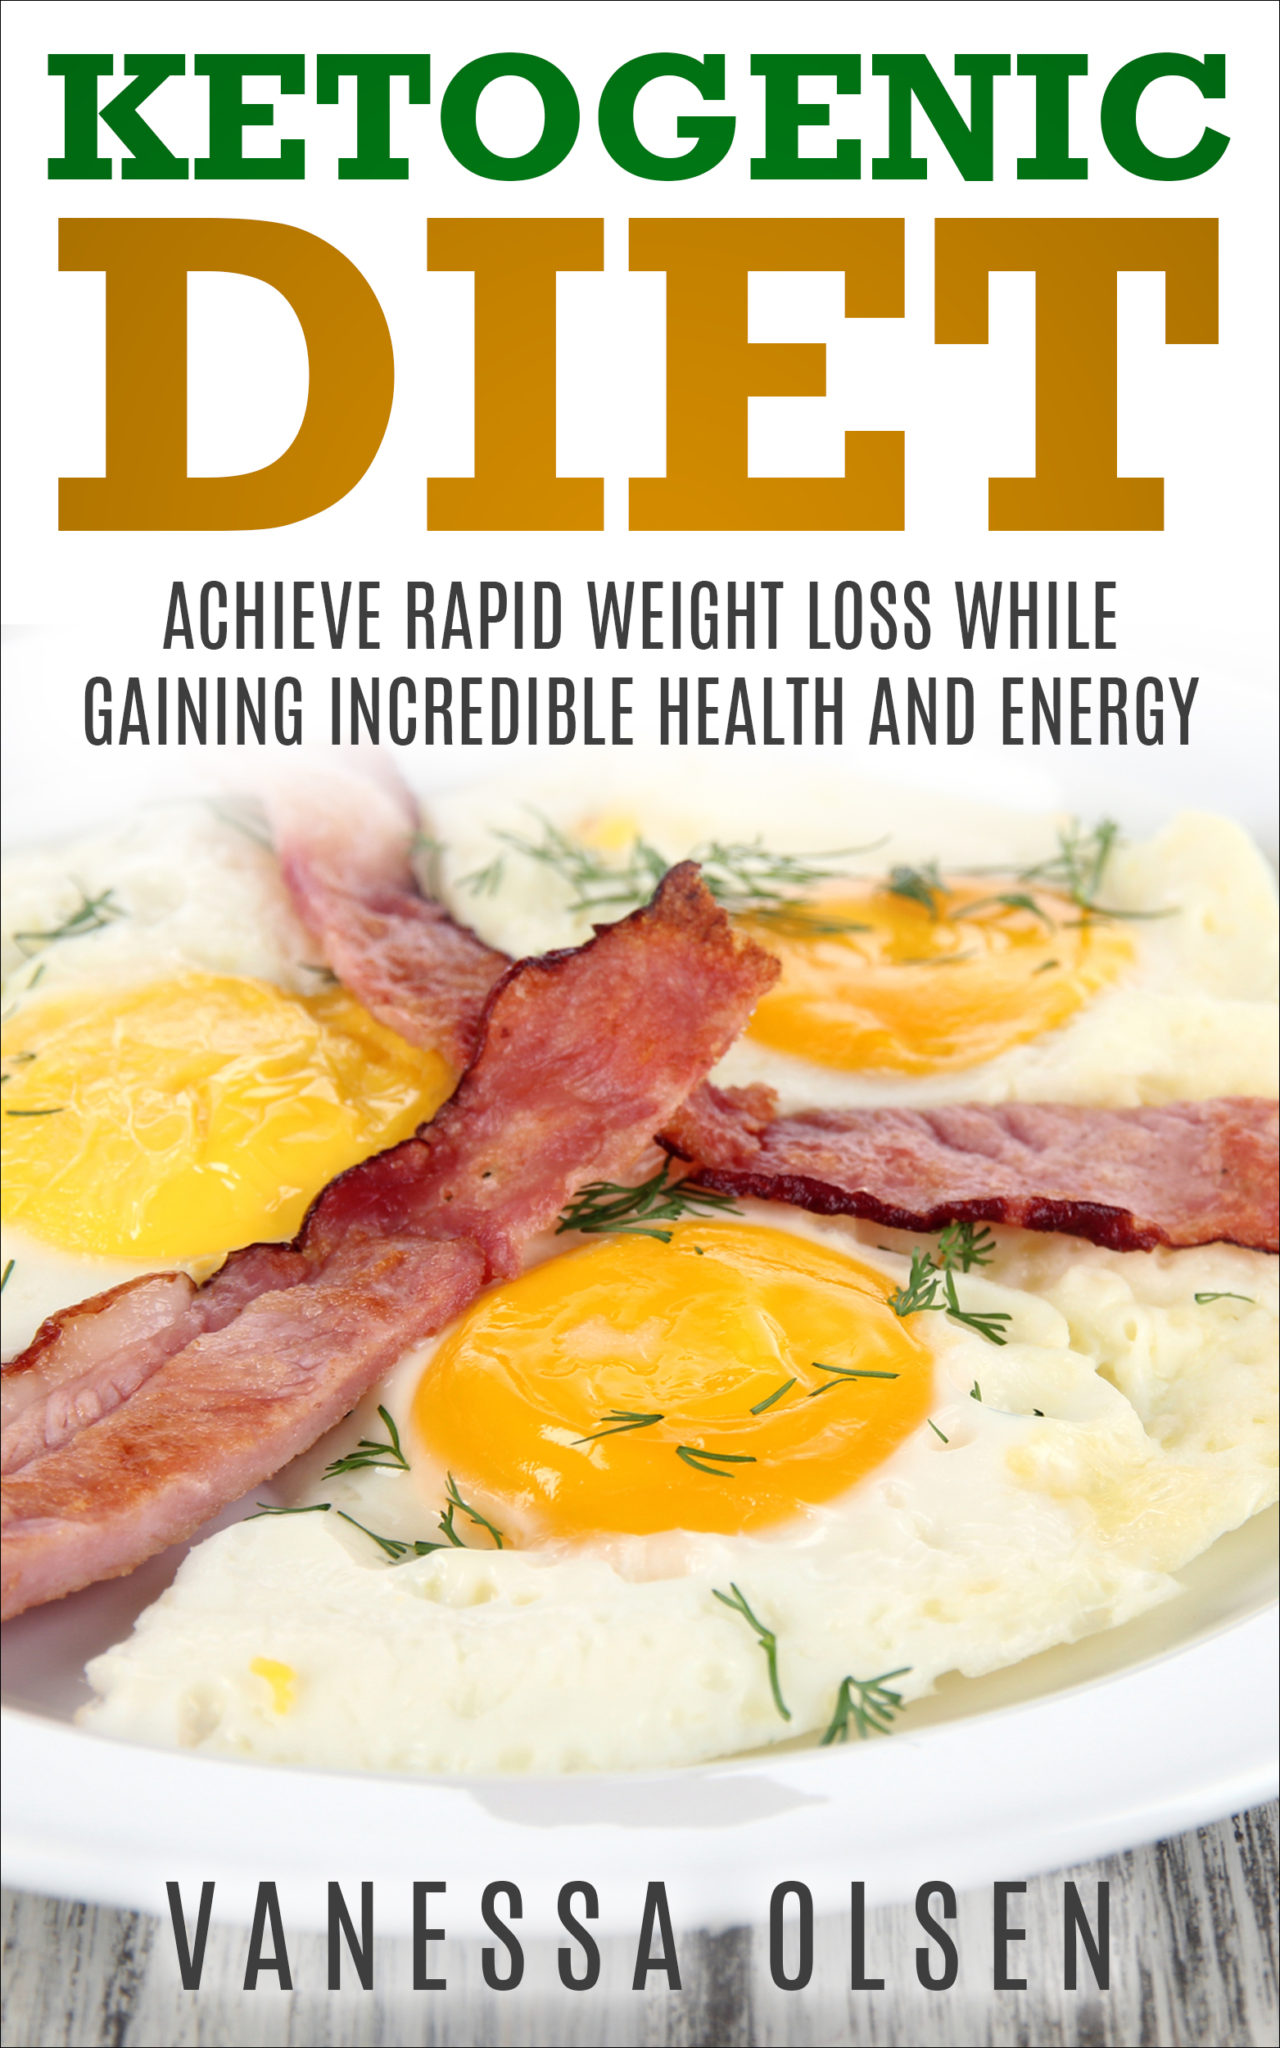 FREE: Ketogenic Diet – Achieve Rapid Weight Loss and Gain Incredible Health and Energy by Vanessa Olsen